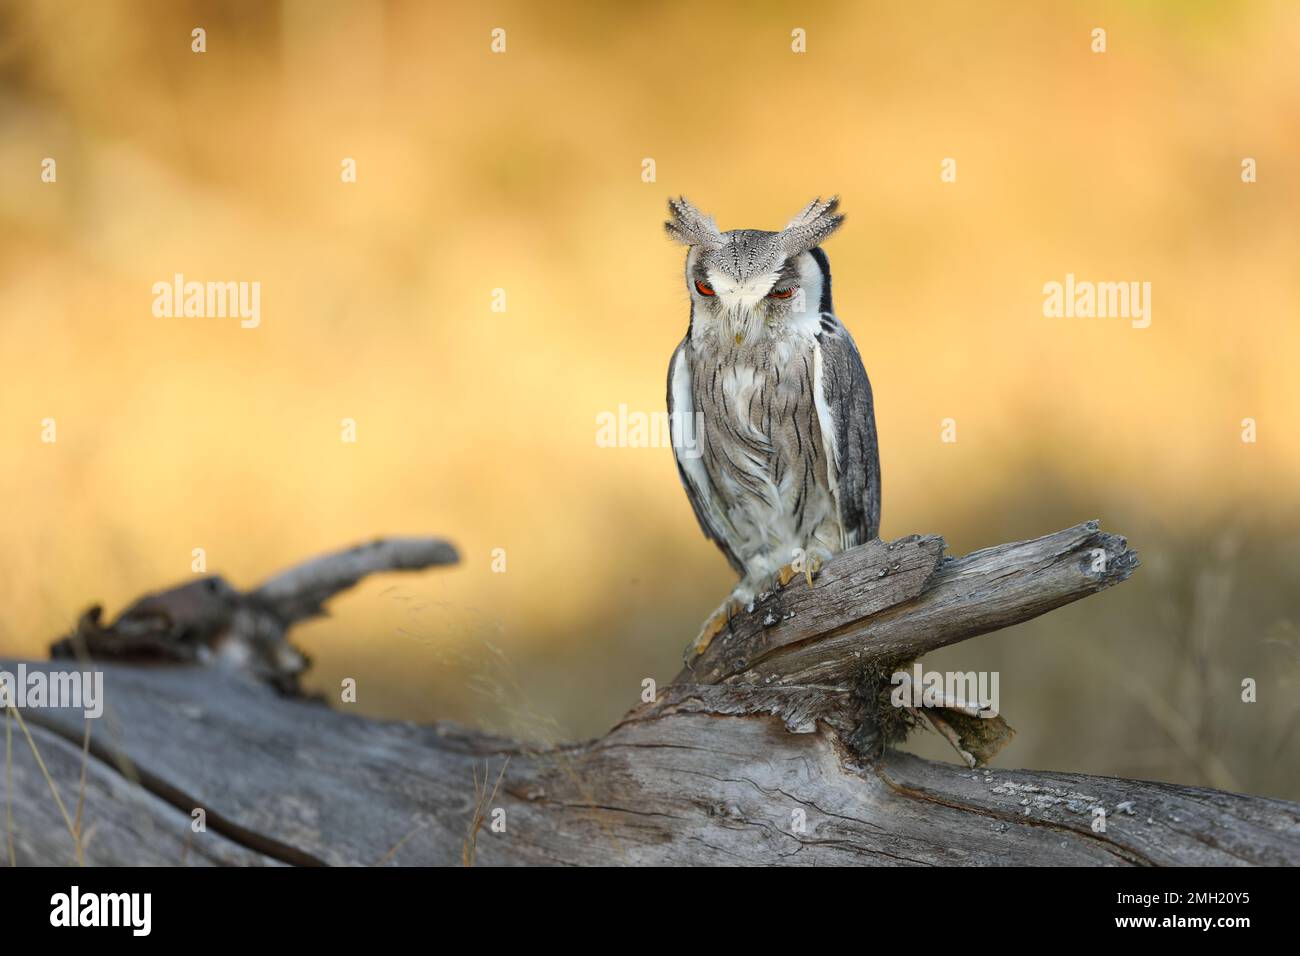 Northern white-faced owl , Ptilopsis leucotis, owl in the nature habitat, sitting on the dry tree branch, yellow grass in background Stock Photo